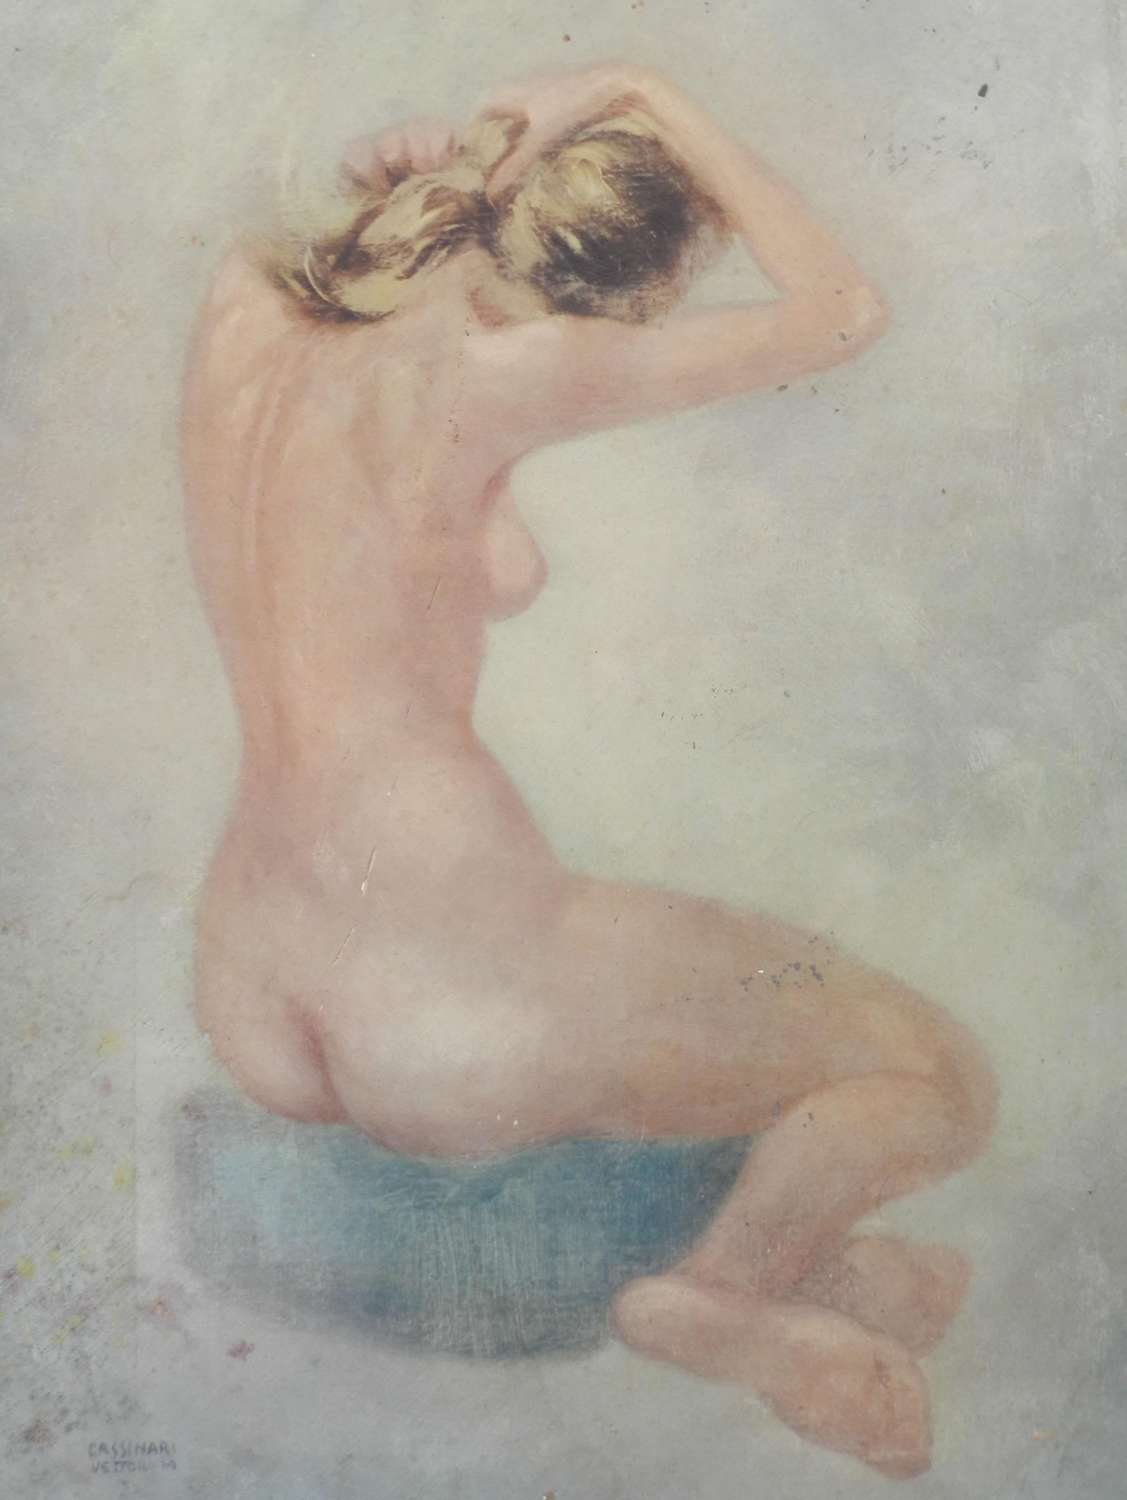 Nude Lady by Cassinari Vettor Lithograph Mid Century